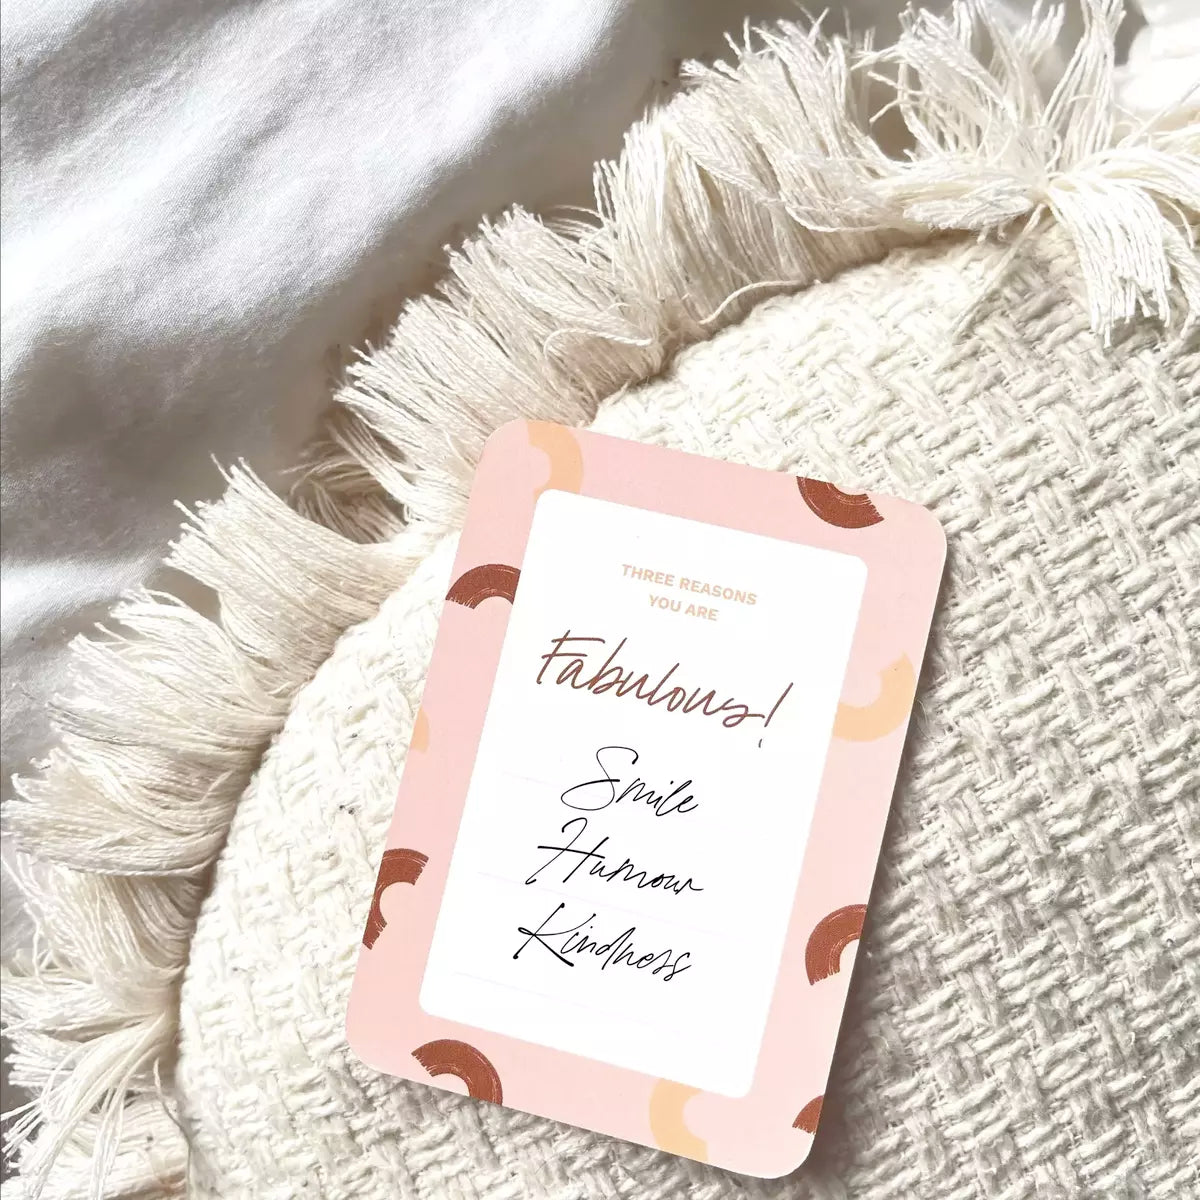 A Collective Hub Kindness Card with the word 'February' on top of a pillow.